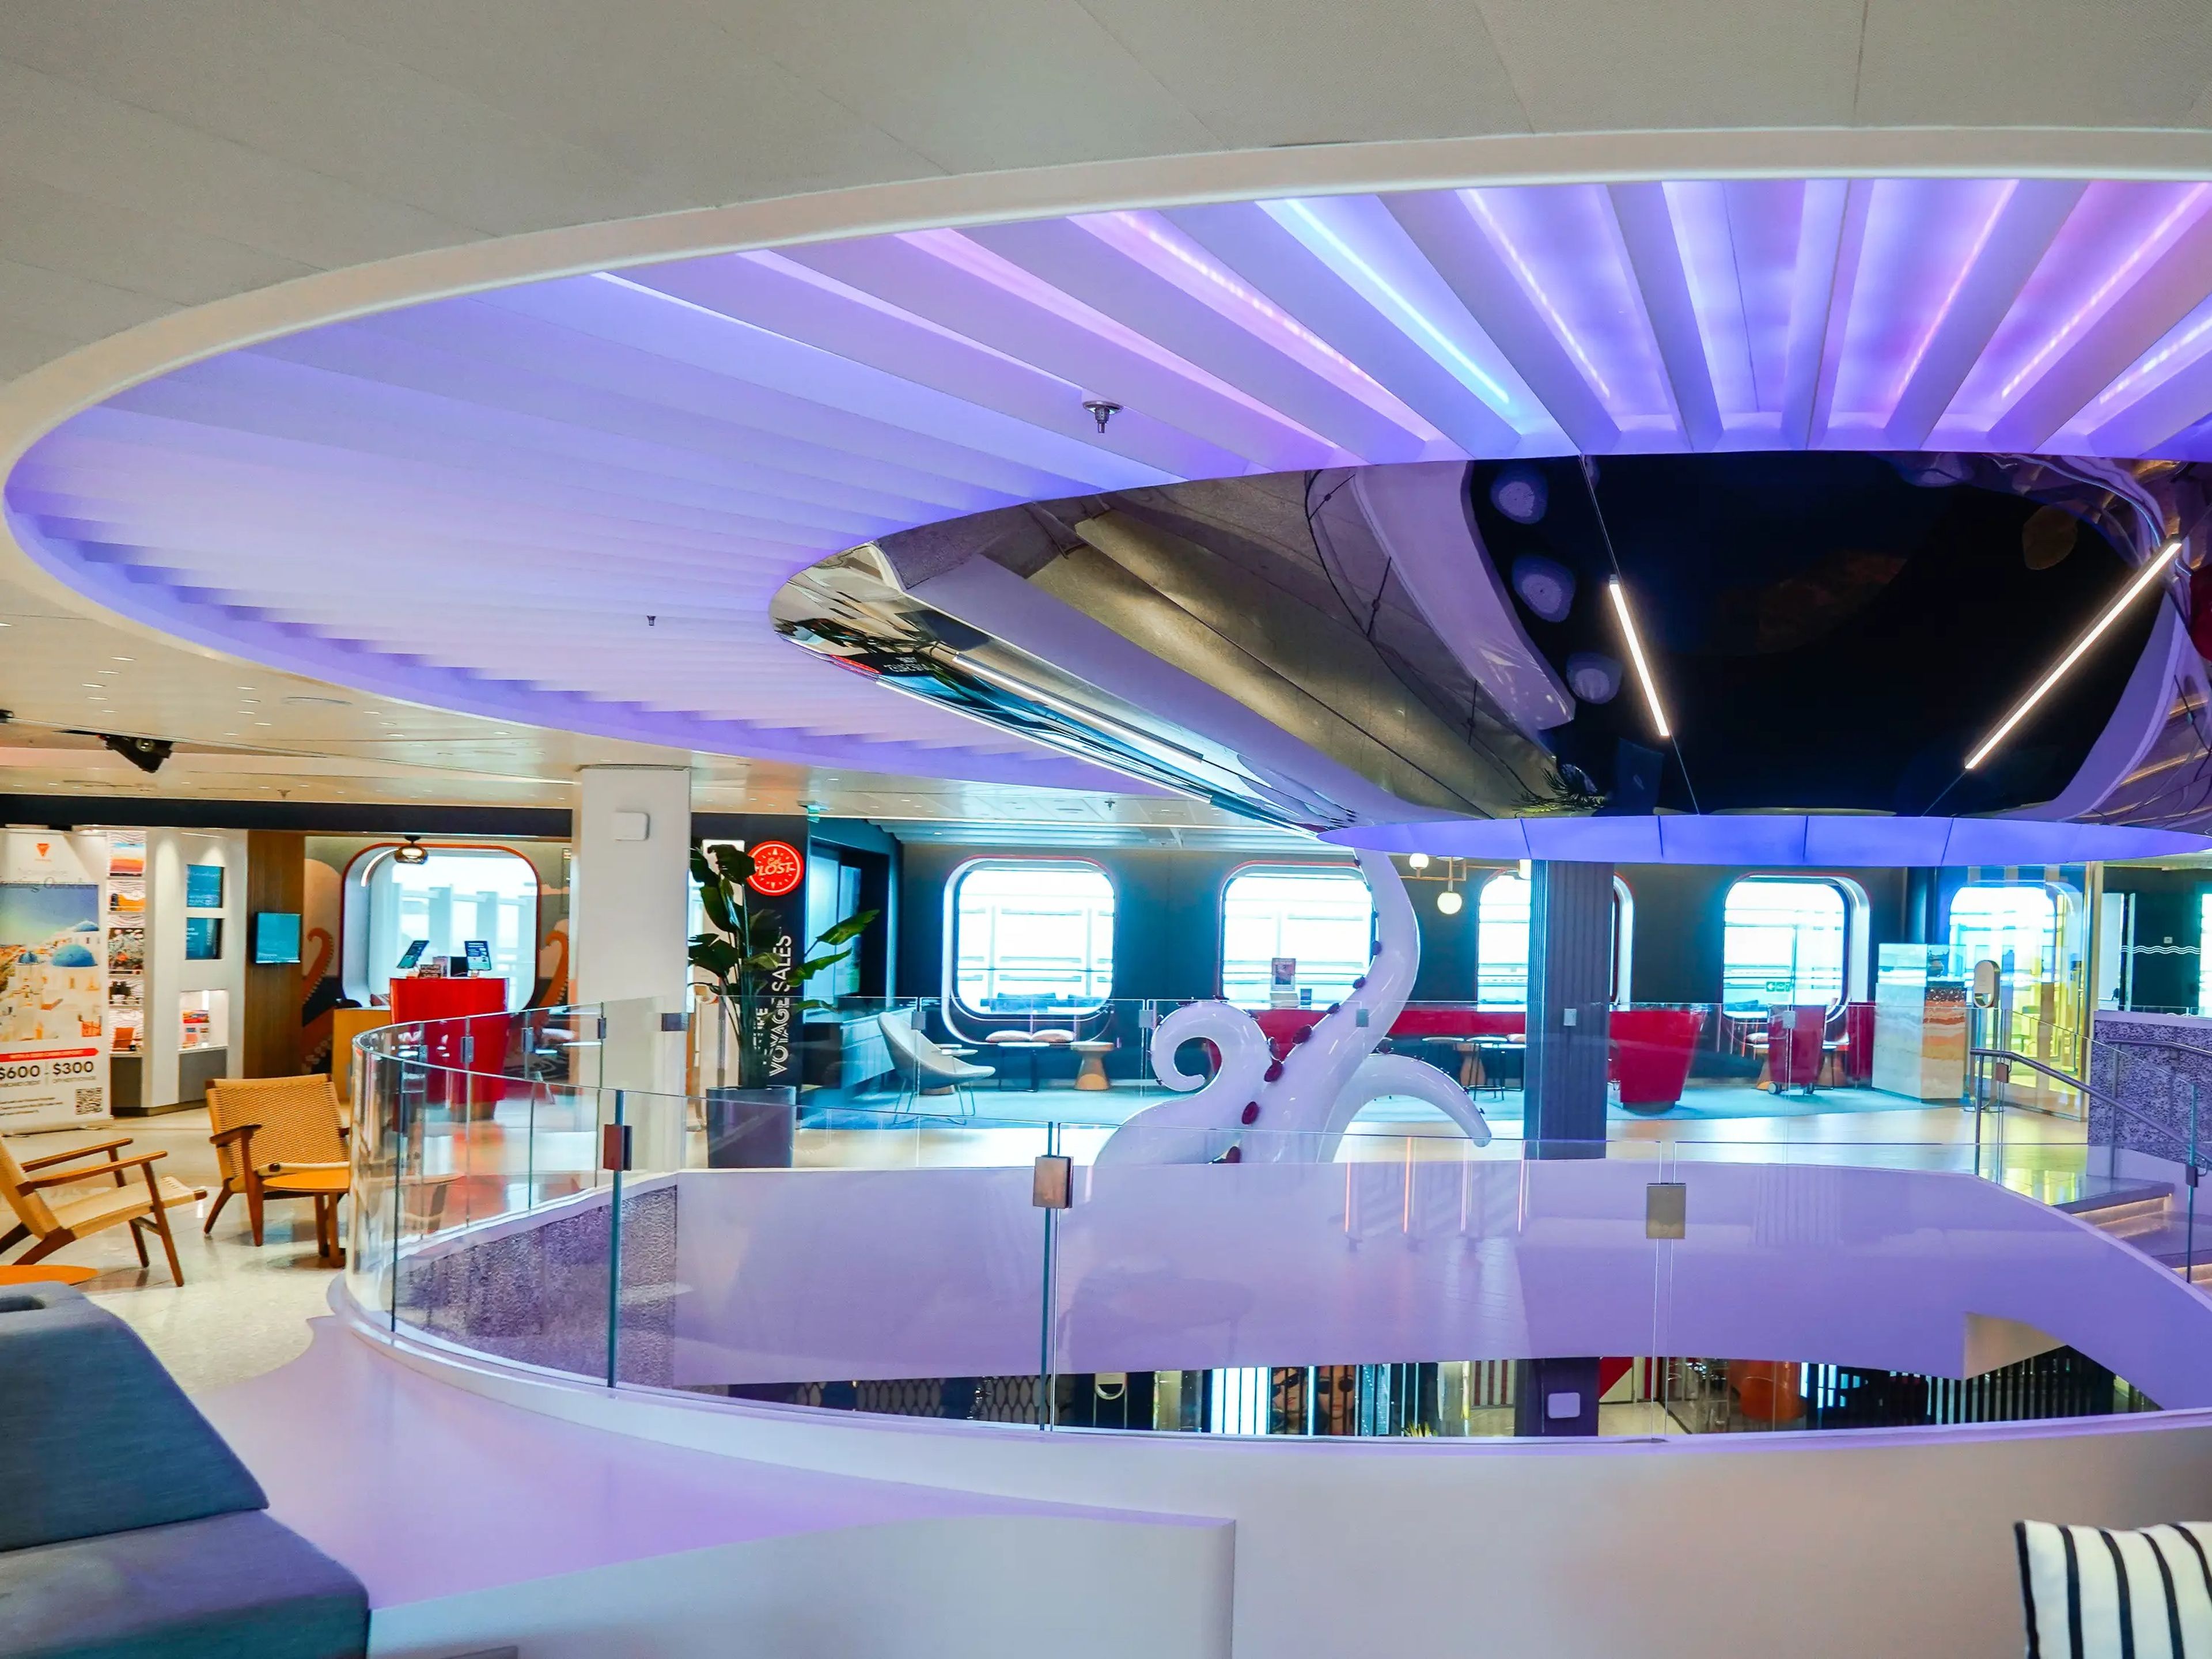 Inside. a cruise ship lobby are white walls and a circular ceiling feature with blue and purple lights shining down